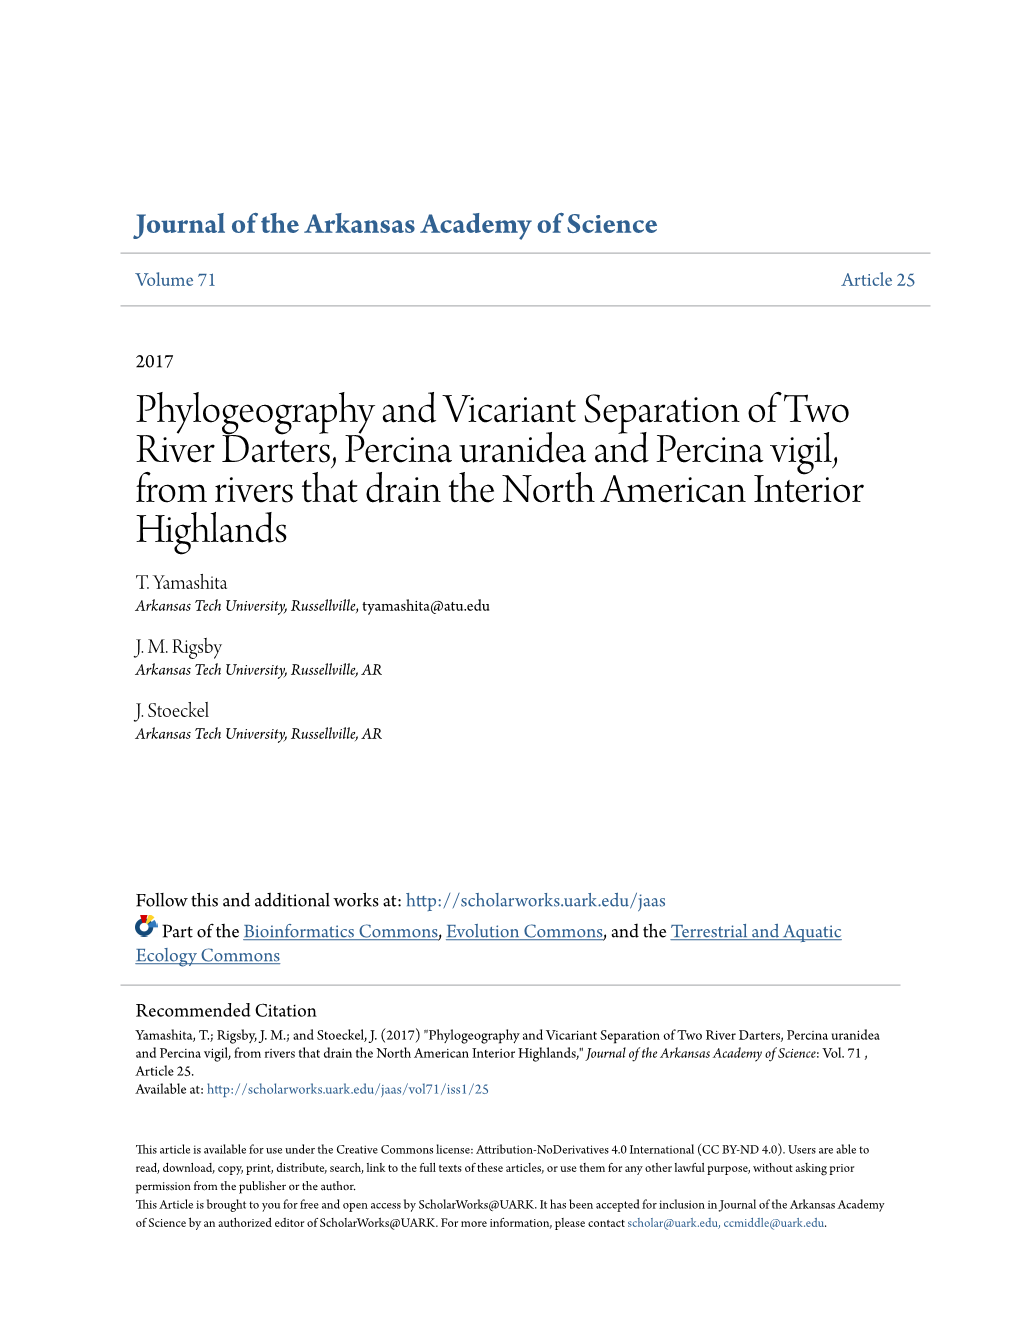 Phylogeography and Vicariant Separation of Two River Darters, Percina Uranidea and Percina Vigil, from Rivers That Drain the North American Interior Highlands T